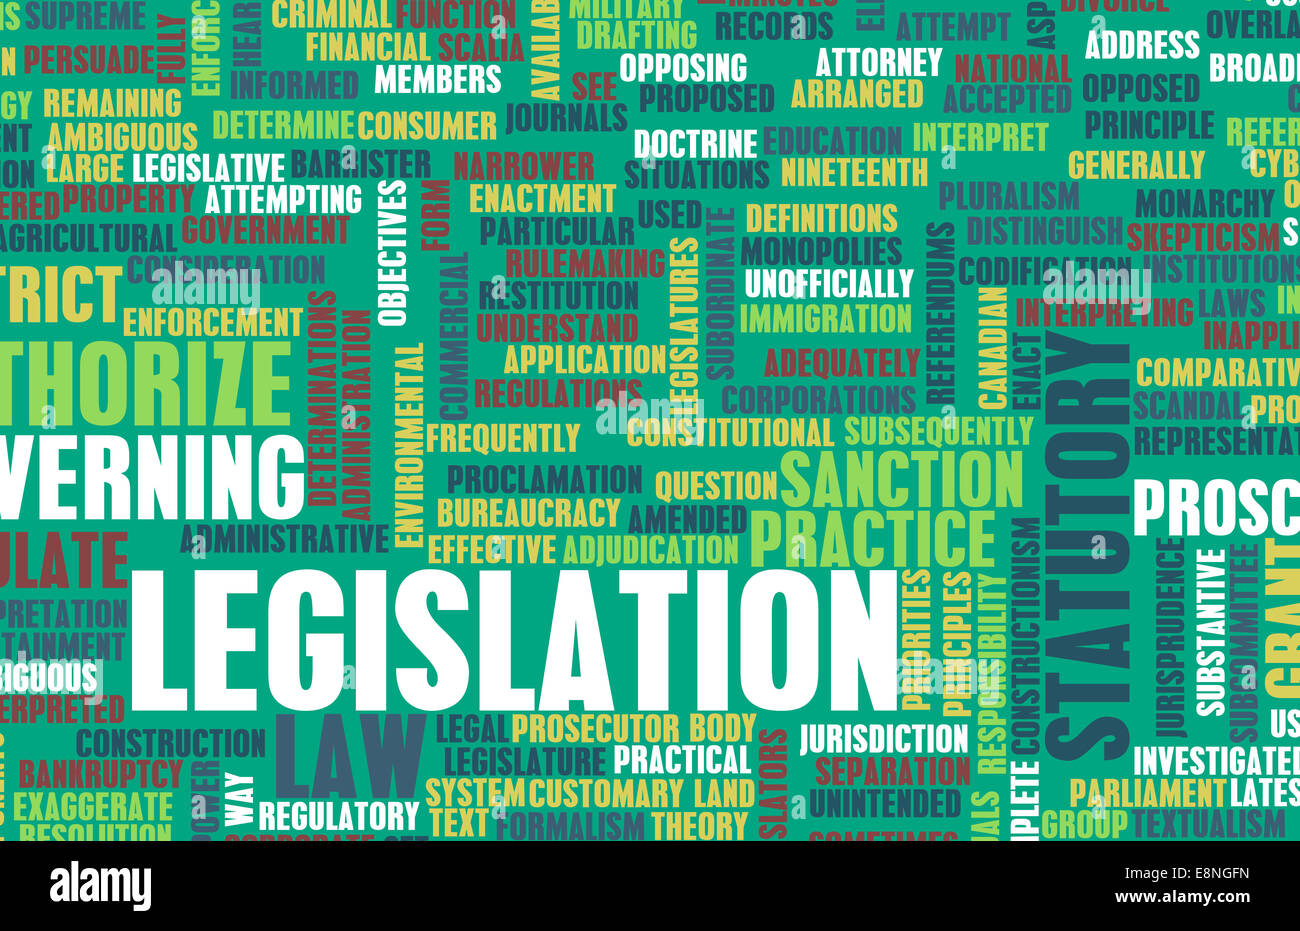 Legislation or Statutory Law as a Concept Stock Photo